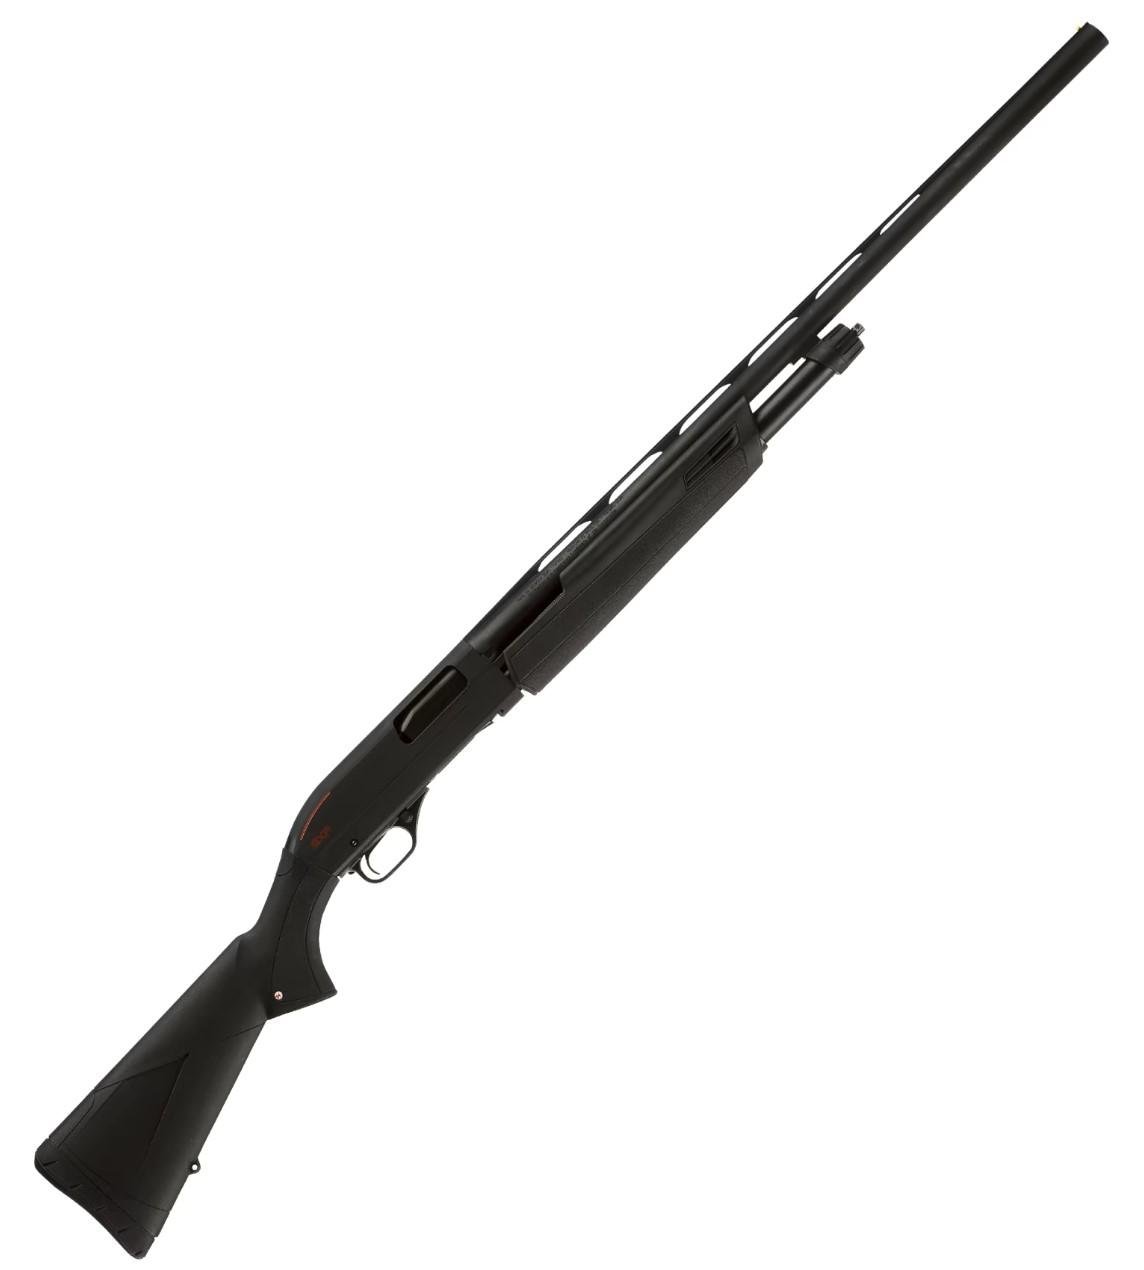 Winchester SXP Black Shadow Pump-Action Shotgun - 12 Gauge - 3" Chamber - 28" - $249.98 (free store pickup) (possible $50 rebate from 23/11)